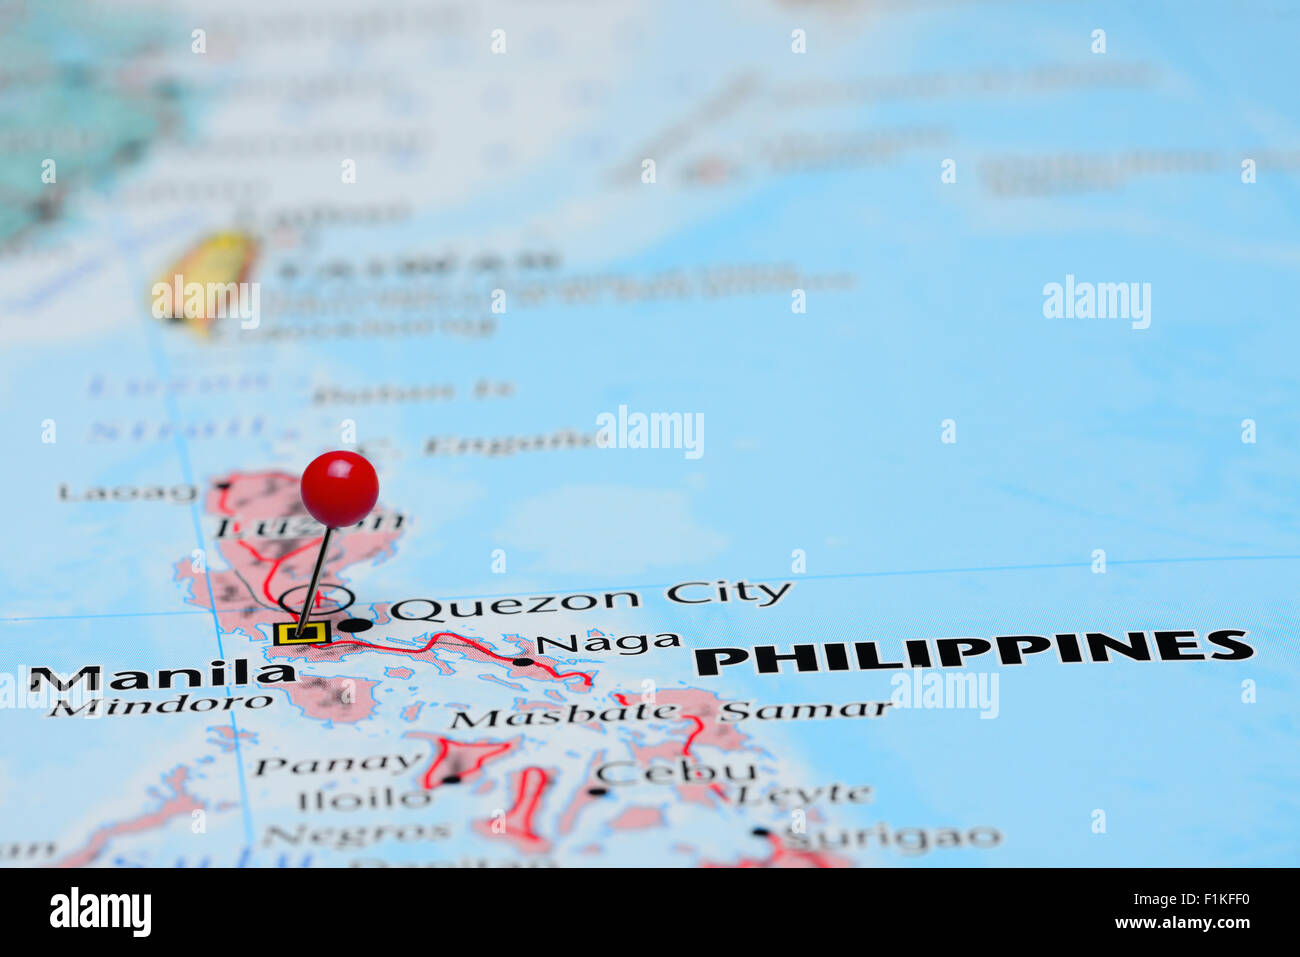 Manila Pinned On A Map Of Asia F1KFF0 